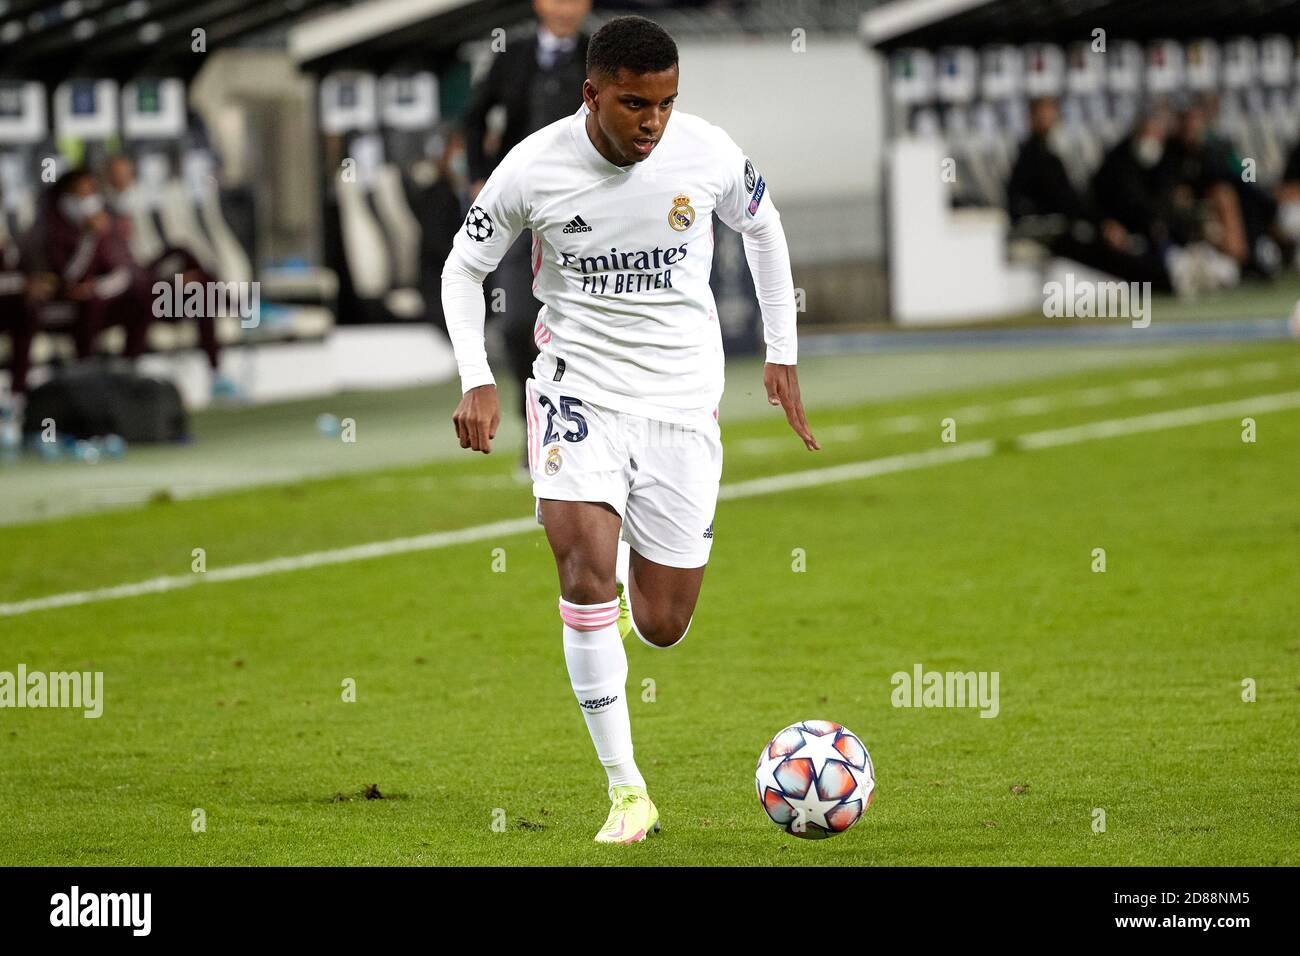 Monchengladbach, Germany. 27th Oct, 2020. Rodrygo of Real Madrid during the UEFA Champions League match between Borussia Monchengladbach and Real Madrid at Borussia-Park on October 27, 2020 in Monchengladbach, Spain. Credit: Dax Images/Alamy Live News Stock Photo